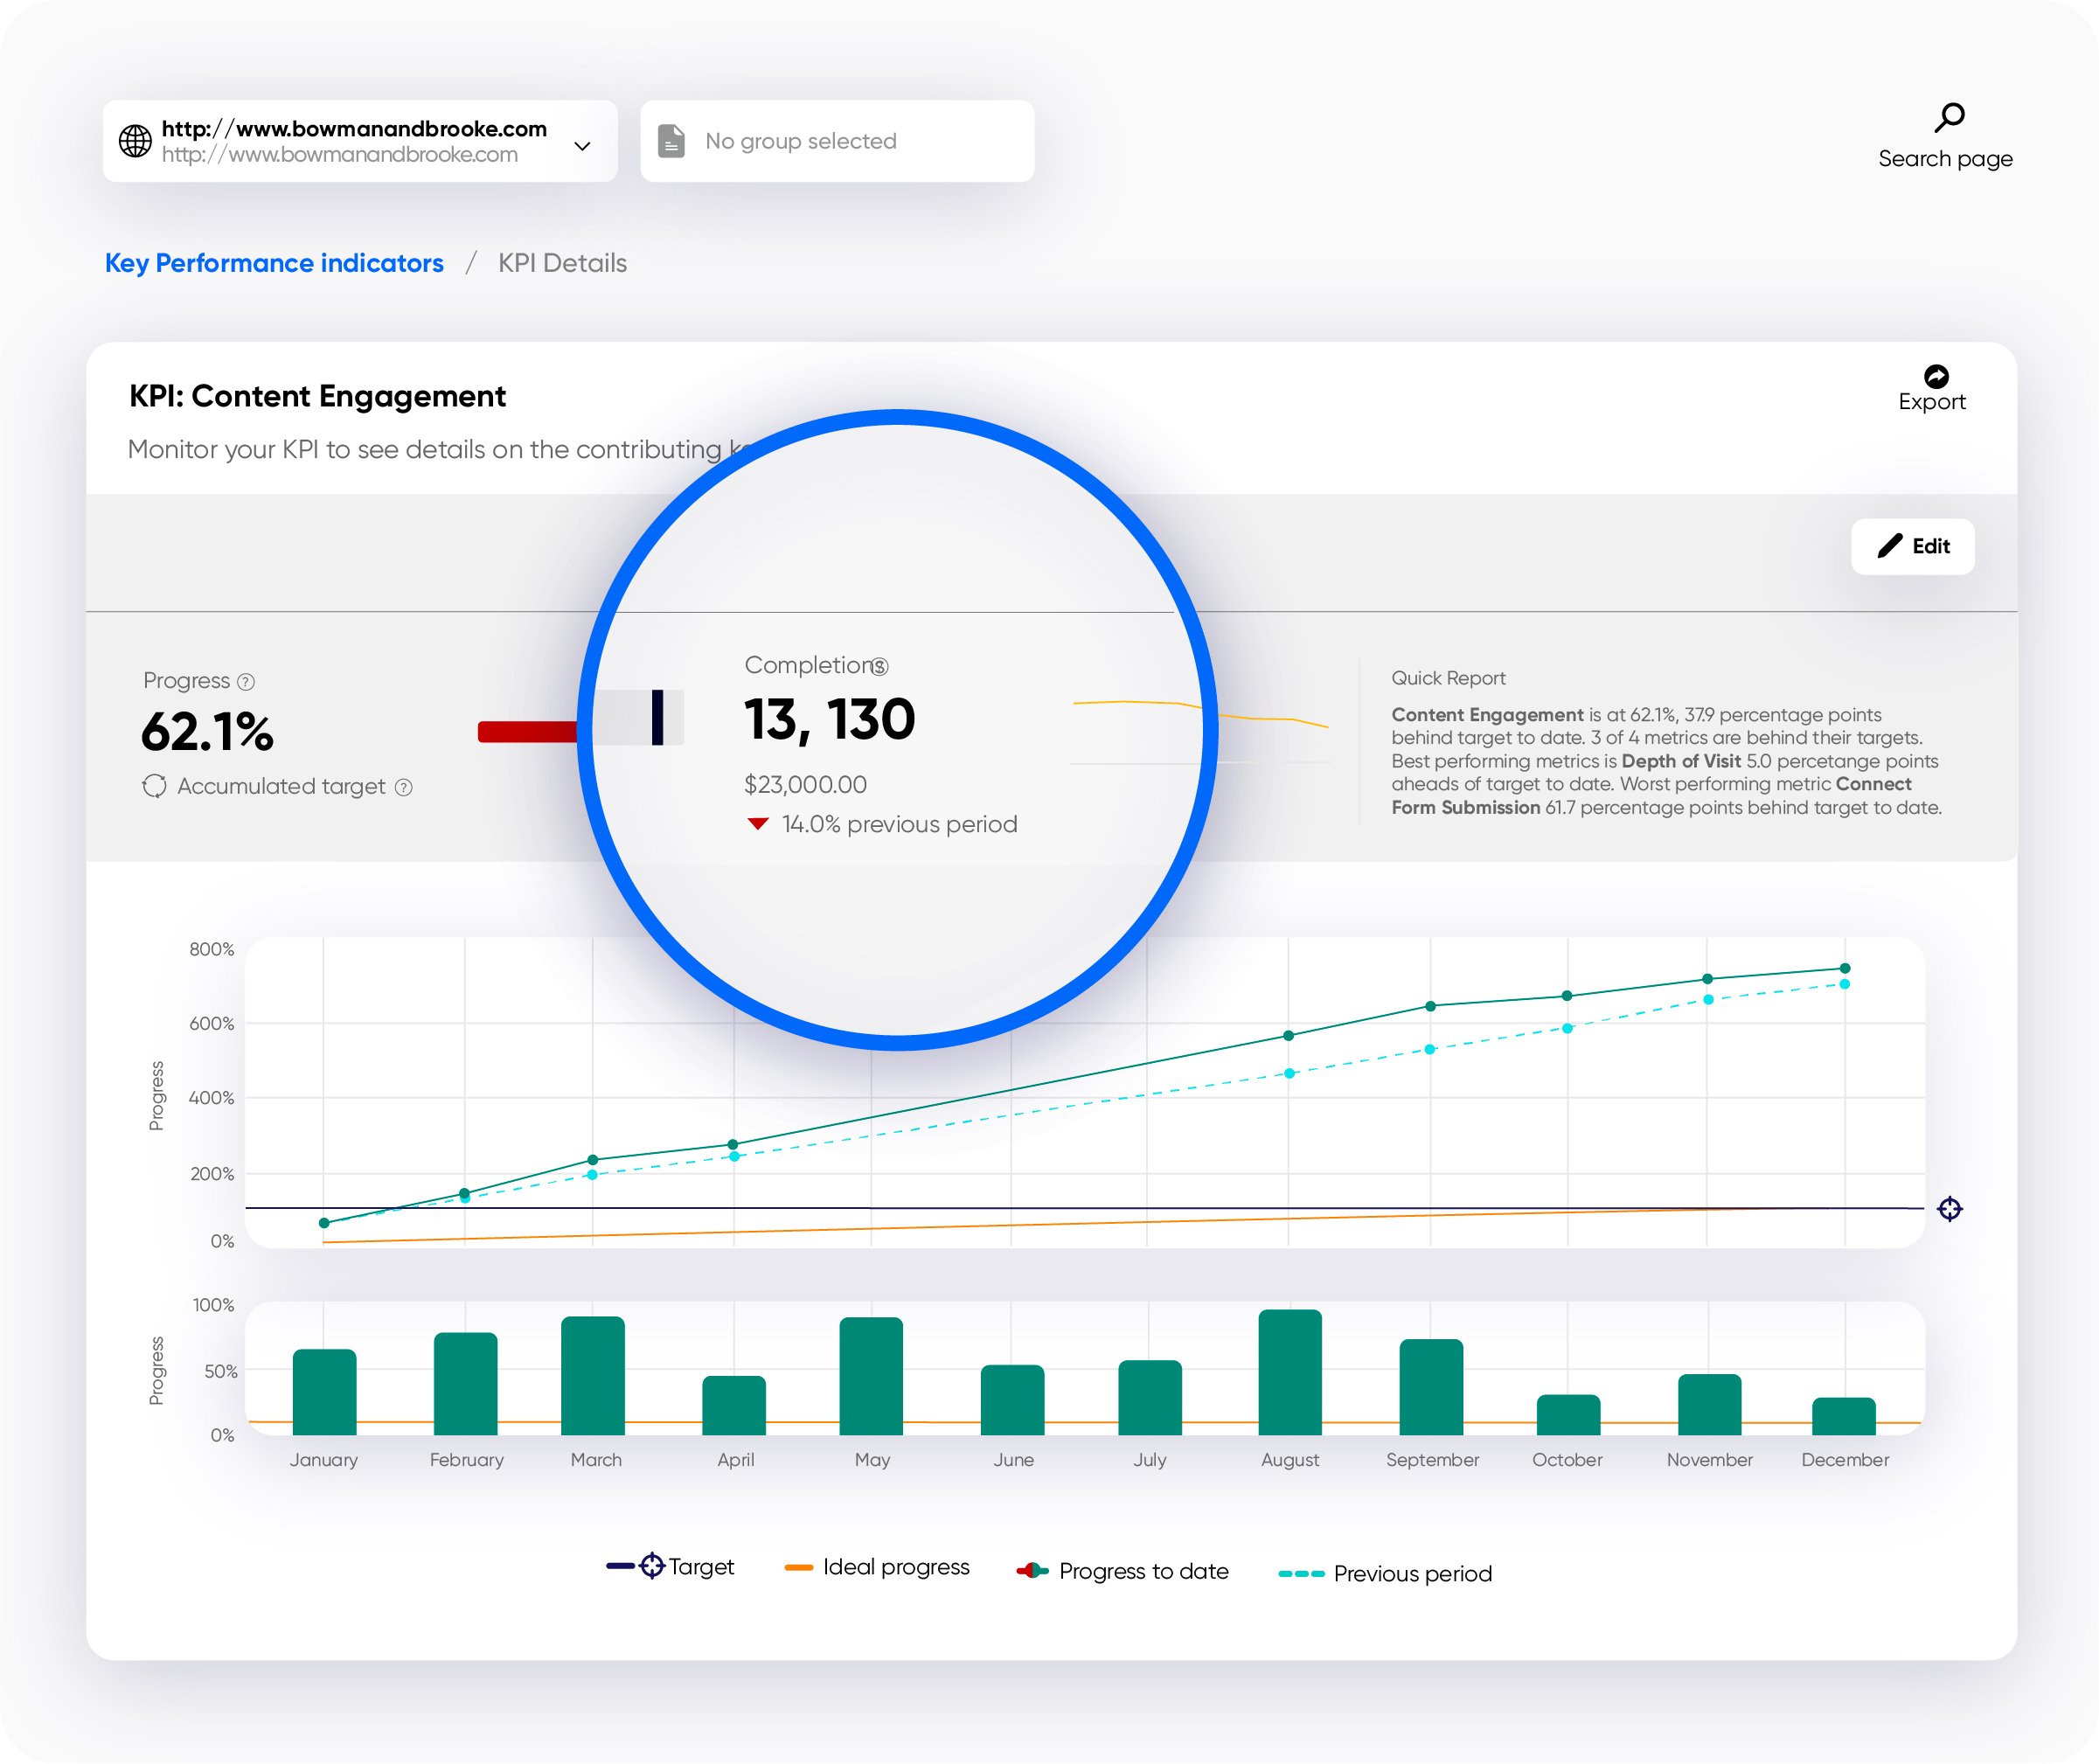 Screenshot of the Key Performance Indicators feature in the Siteimprove platform. Displays Content Engagement as a KPI of an example brand and the progress towards that KPI.